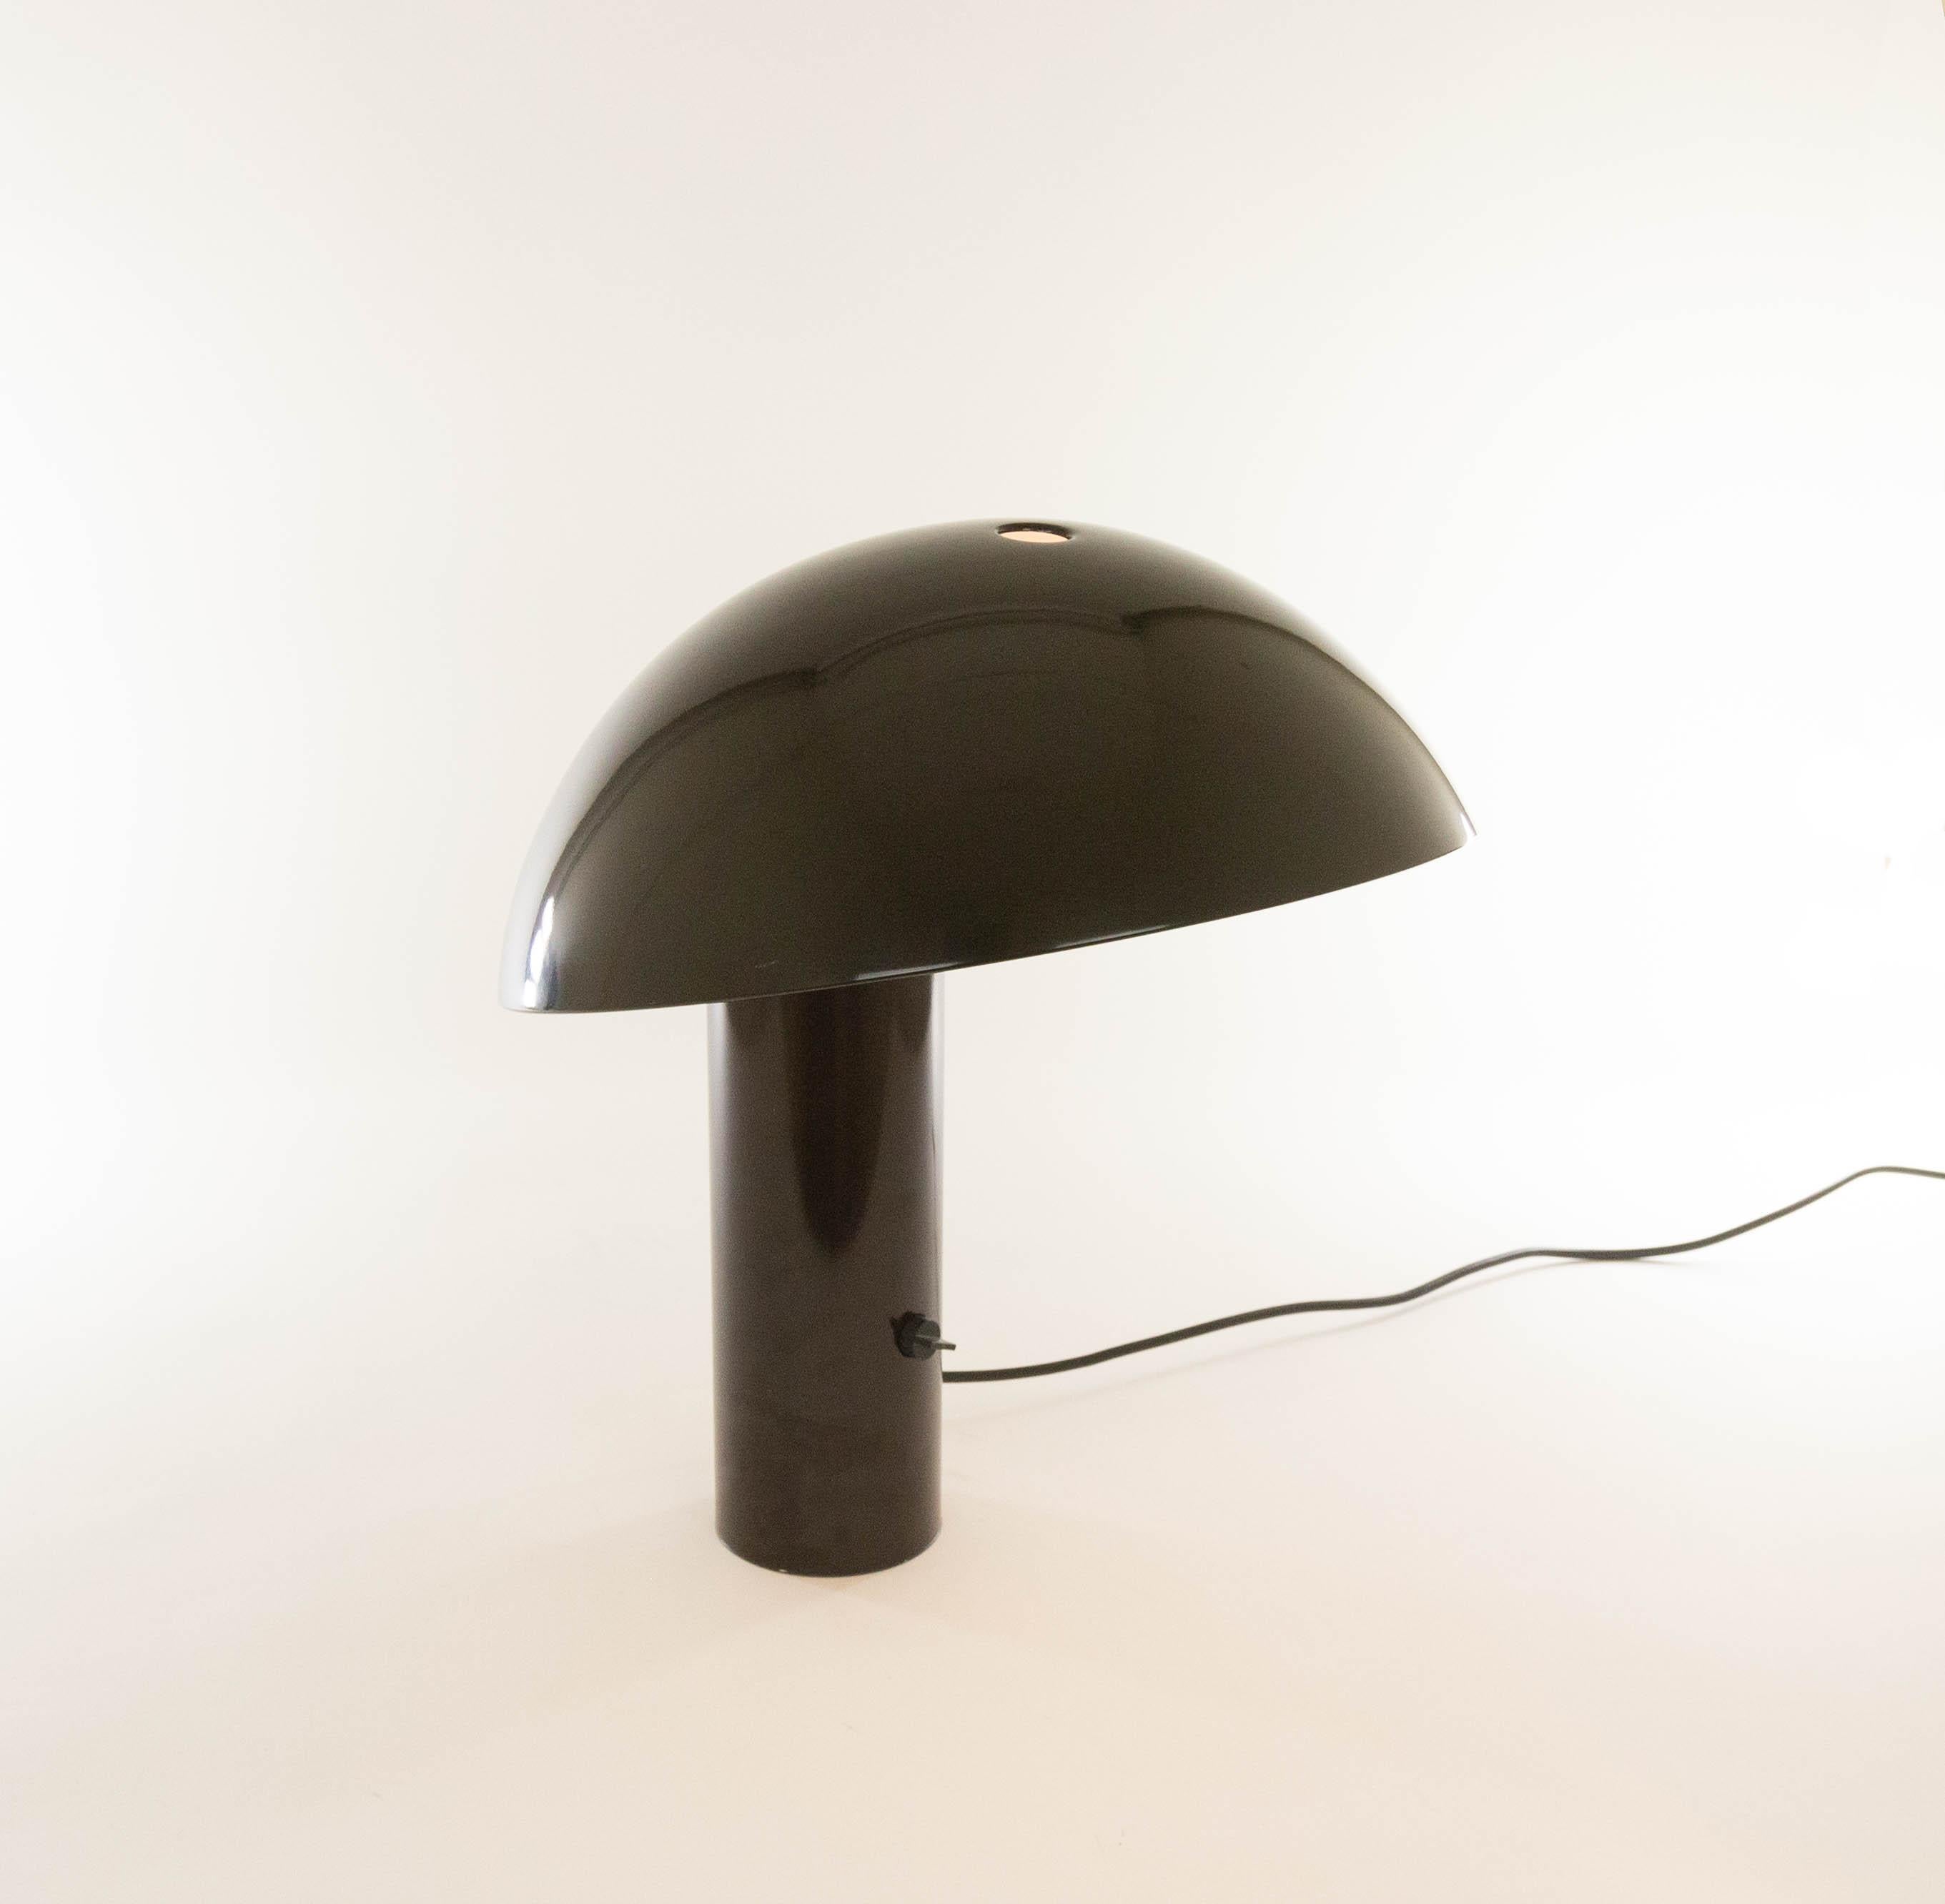 Brown table lamp, model Vaga, designed by Franco Mirenzi in 1978 and produced by Valenti Luce.

The relatively heavy base provides a solid balance for the fairly large round metal top of the lamp. The lamp is made of metal and the on / of switch